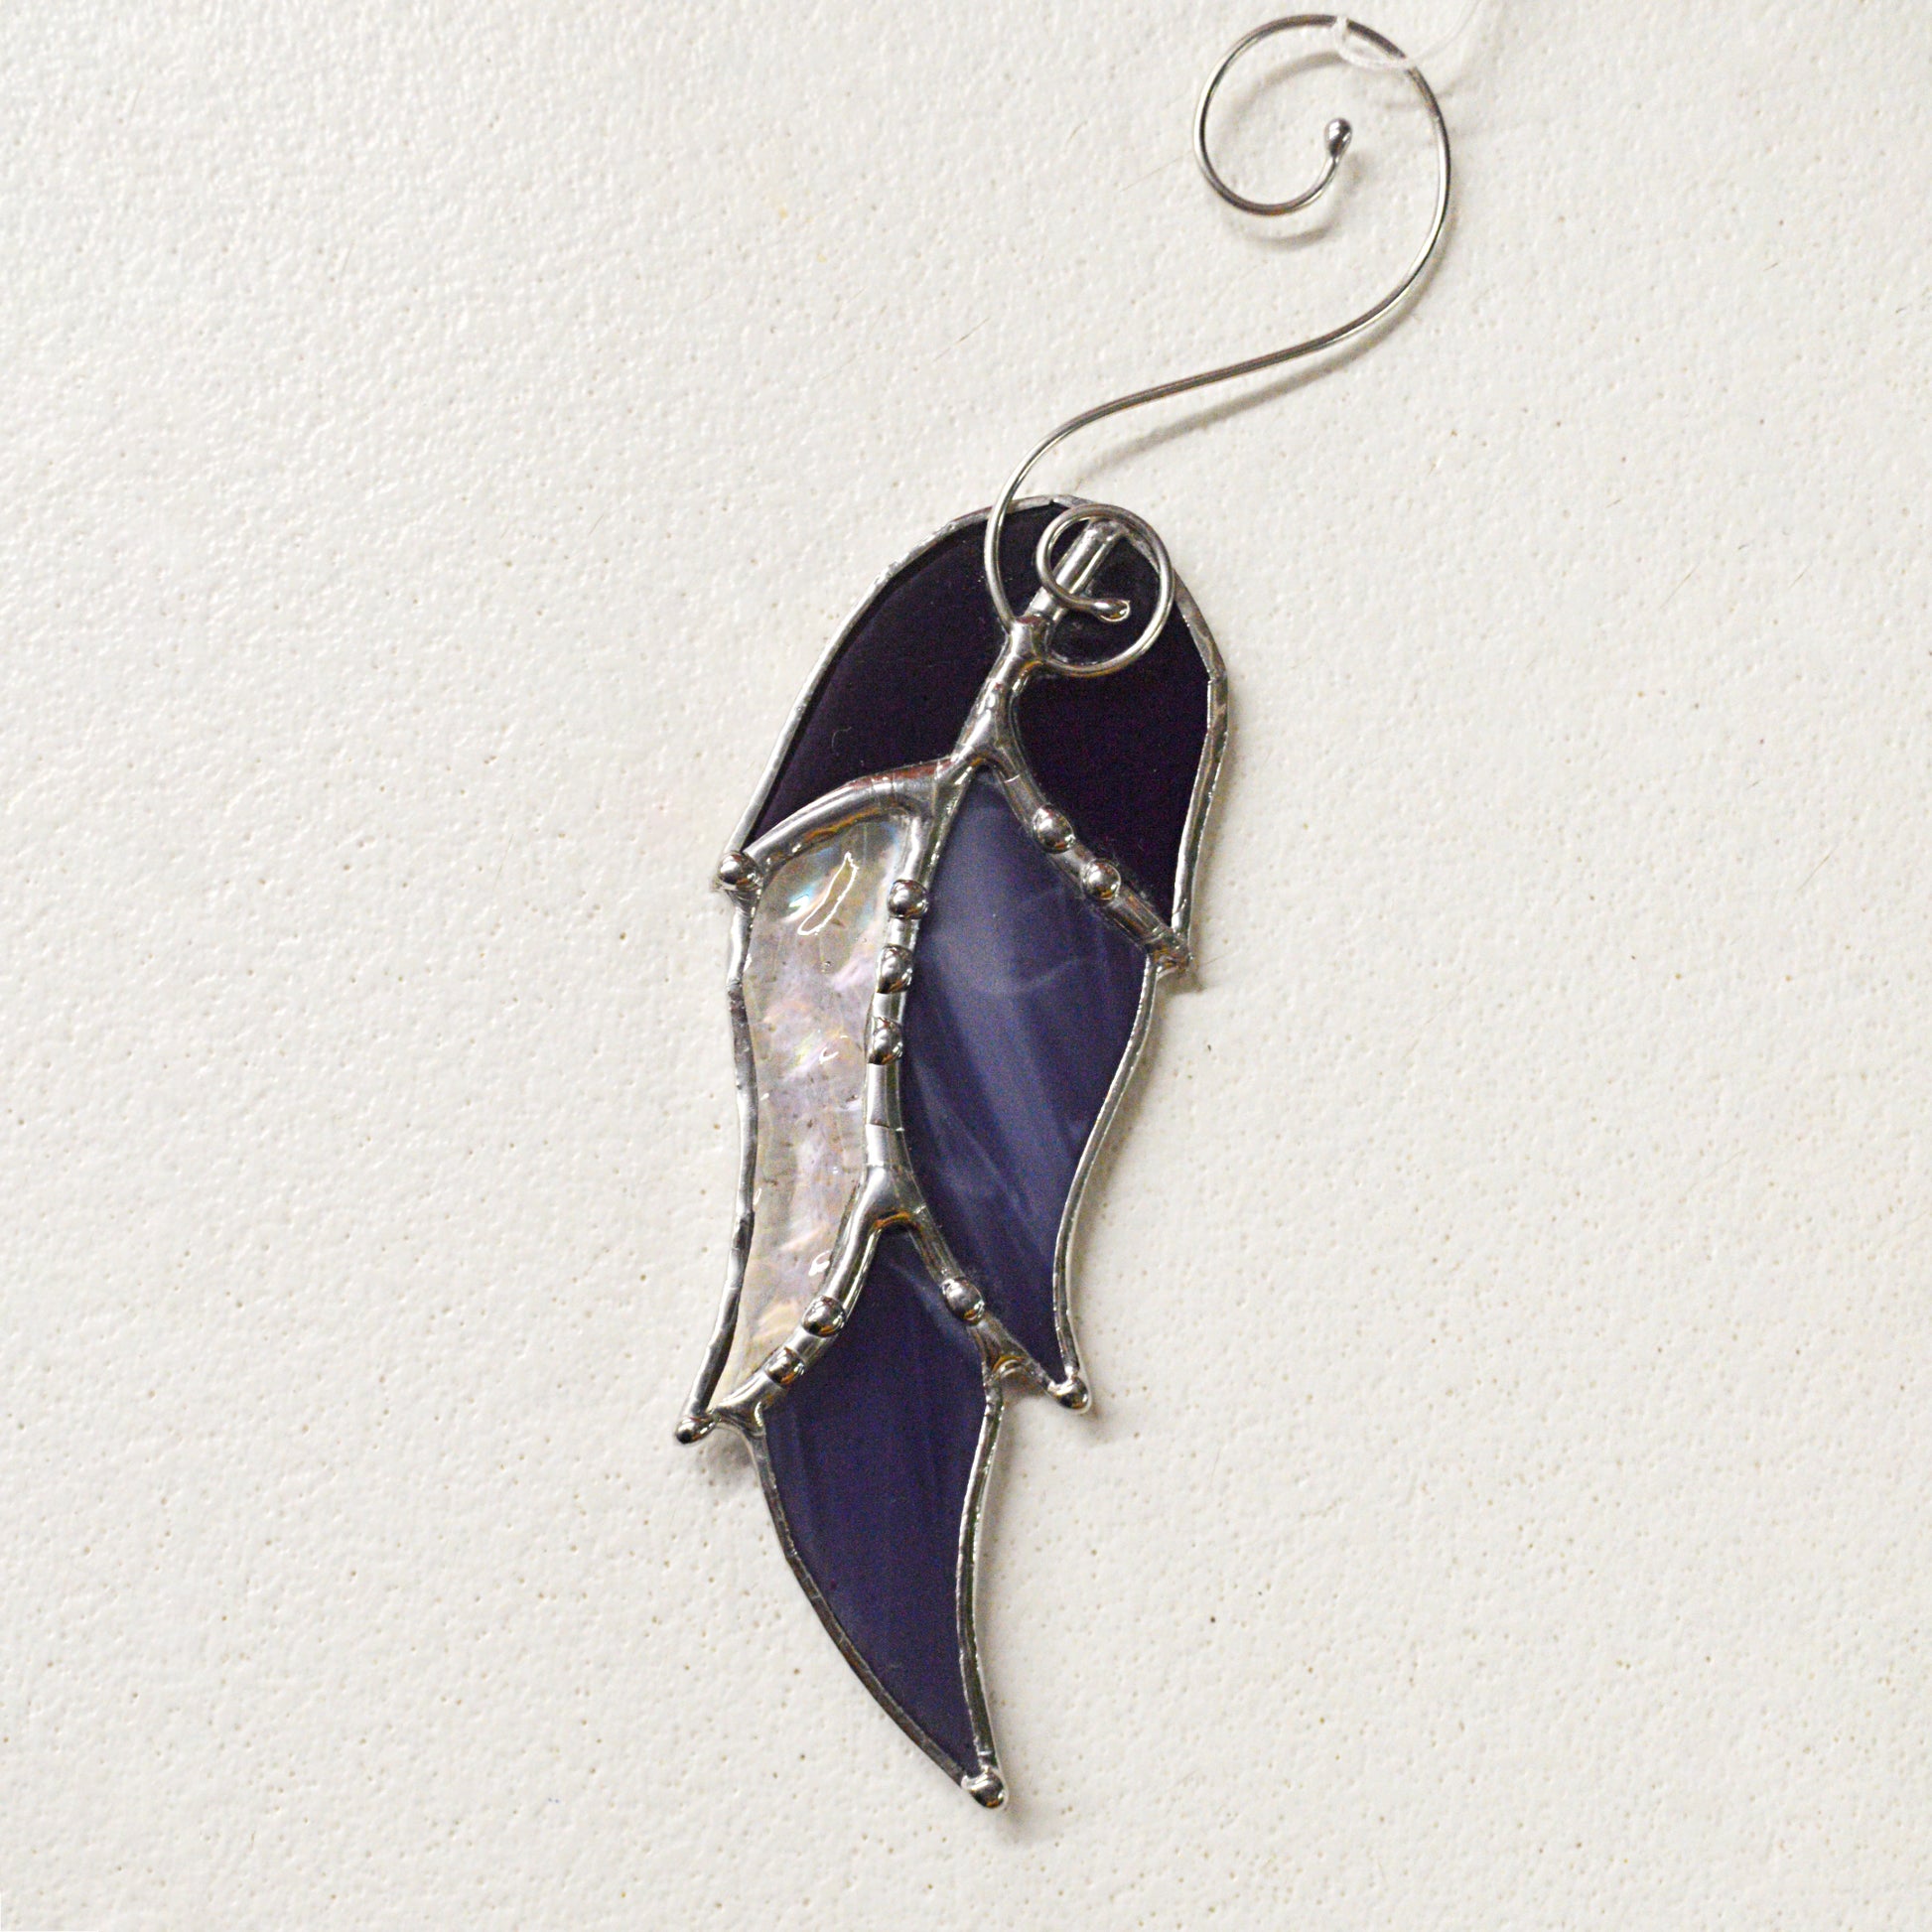 This feather shaped stained glass suncatcher is a great for window decoration, as a gift and more! Hang it up in your window to see the full beauty of the stained glass, add it to a floral arraignment, or use it as a gift for the nature lover in your life.   All stained glass is handmade by Deb's Broken glass in Bathurst NB.  